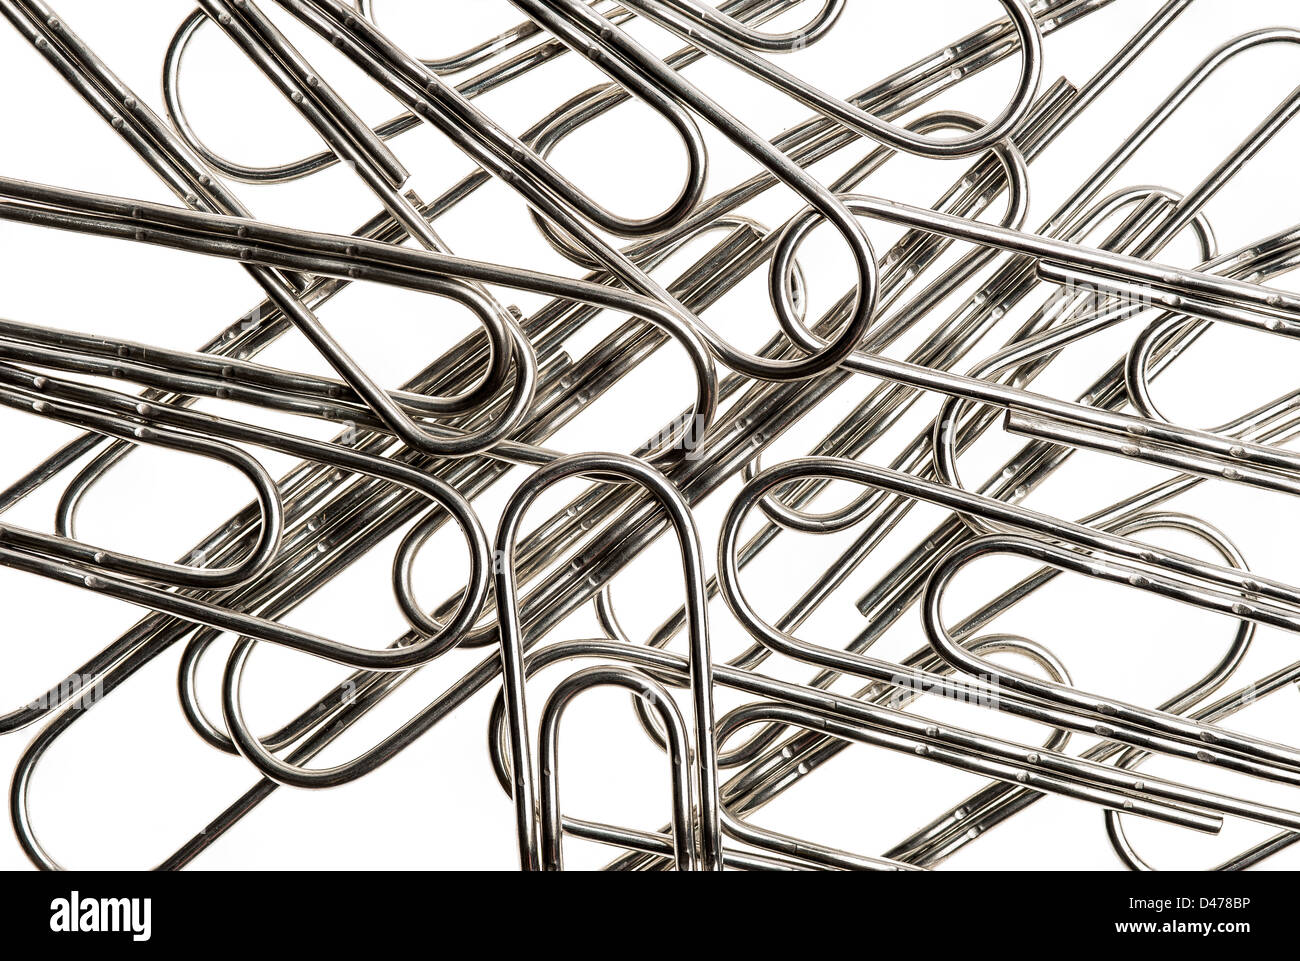 Small pile of large paper clips. Silver design on white background. Stock Photo